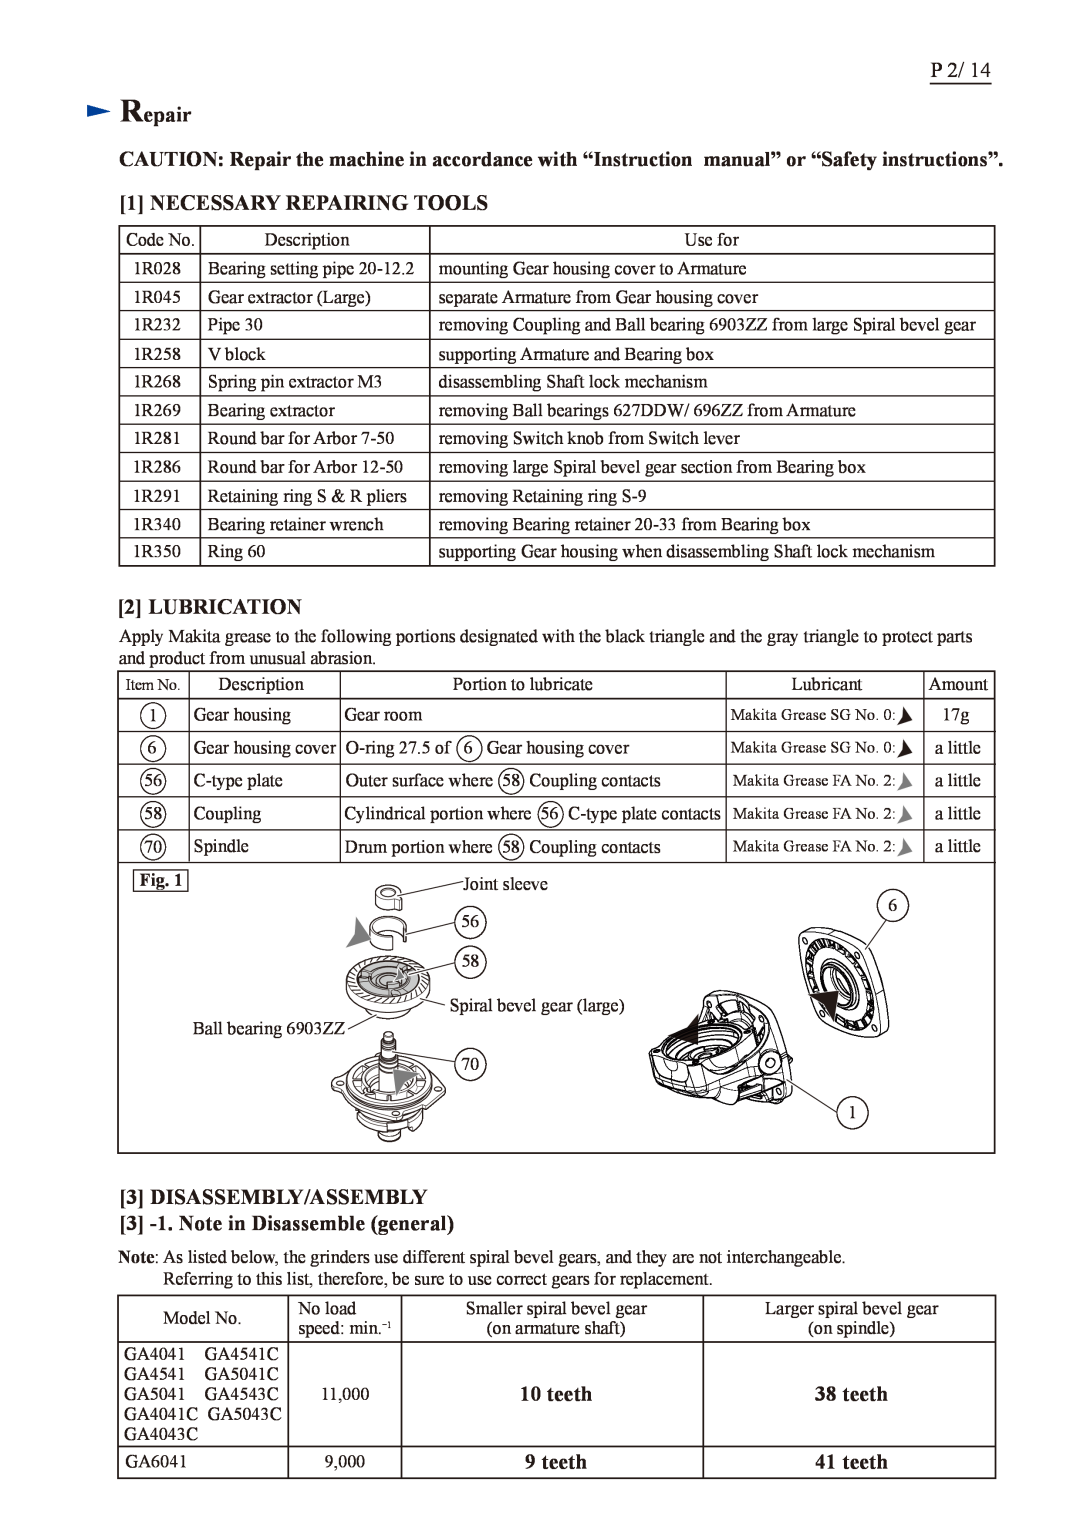 Makita GA4543C Necessary Repairing Tools, Lubrication, DISASSEMBLY/ASSEMBLY 3 -1. Note in Disassemble general, teeth 